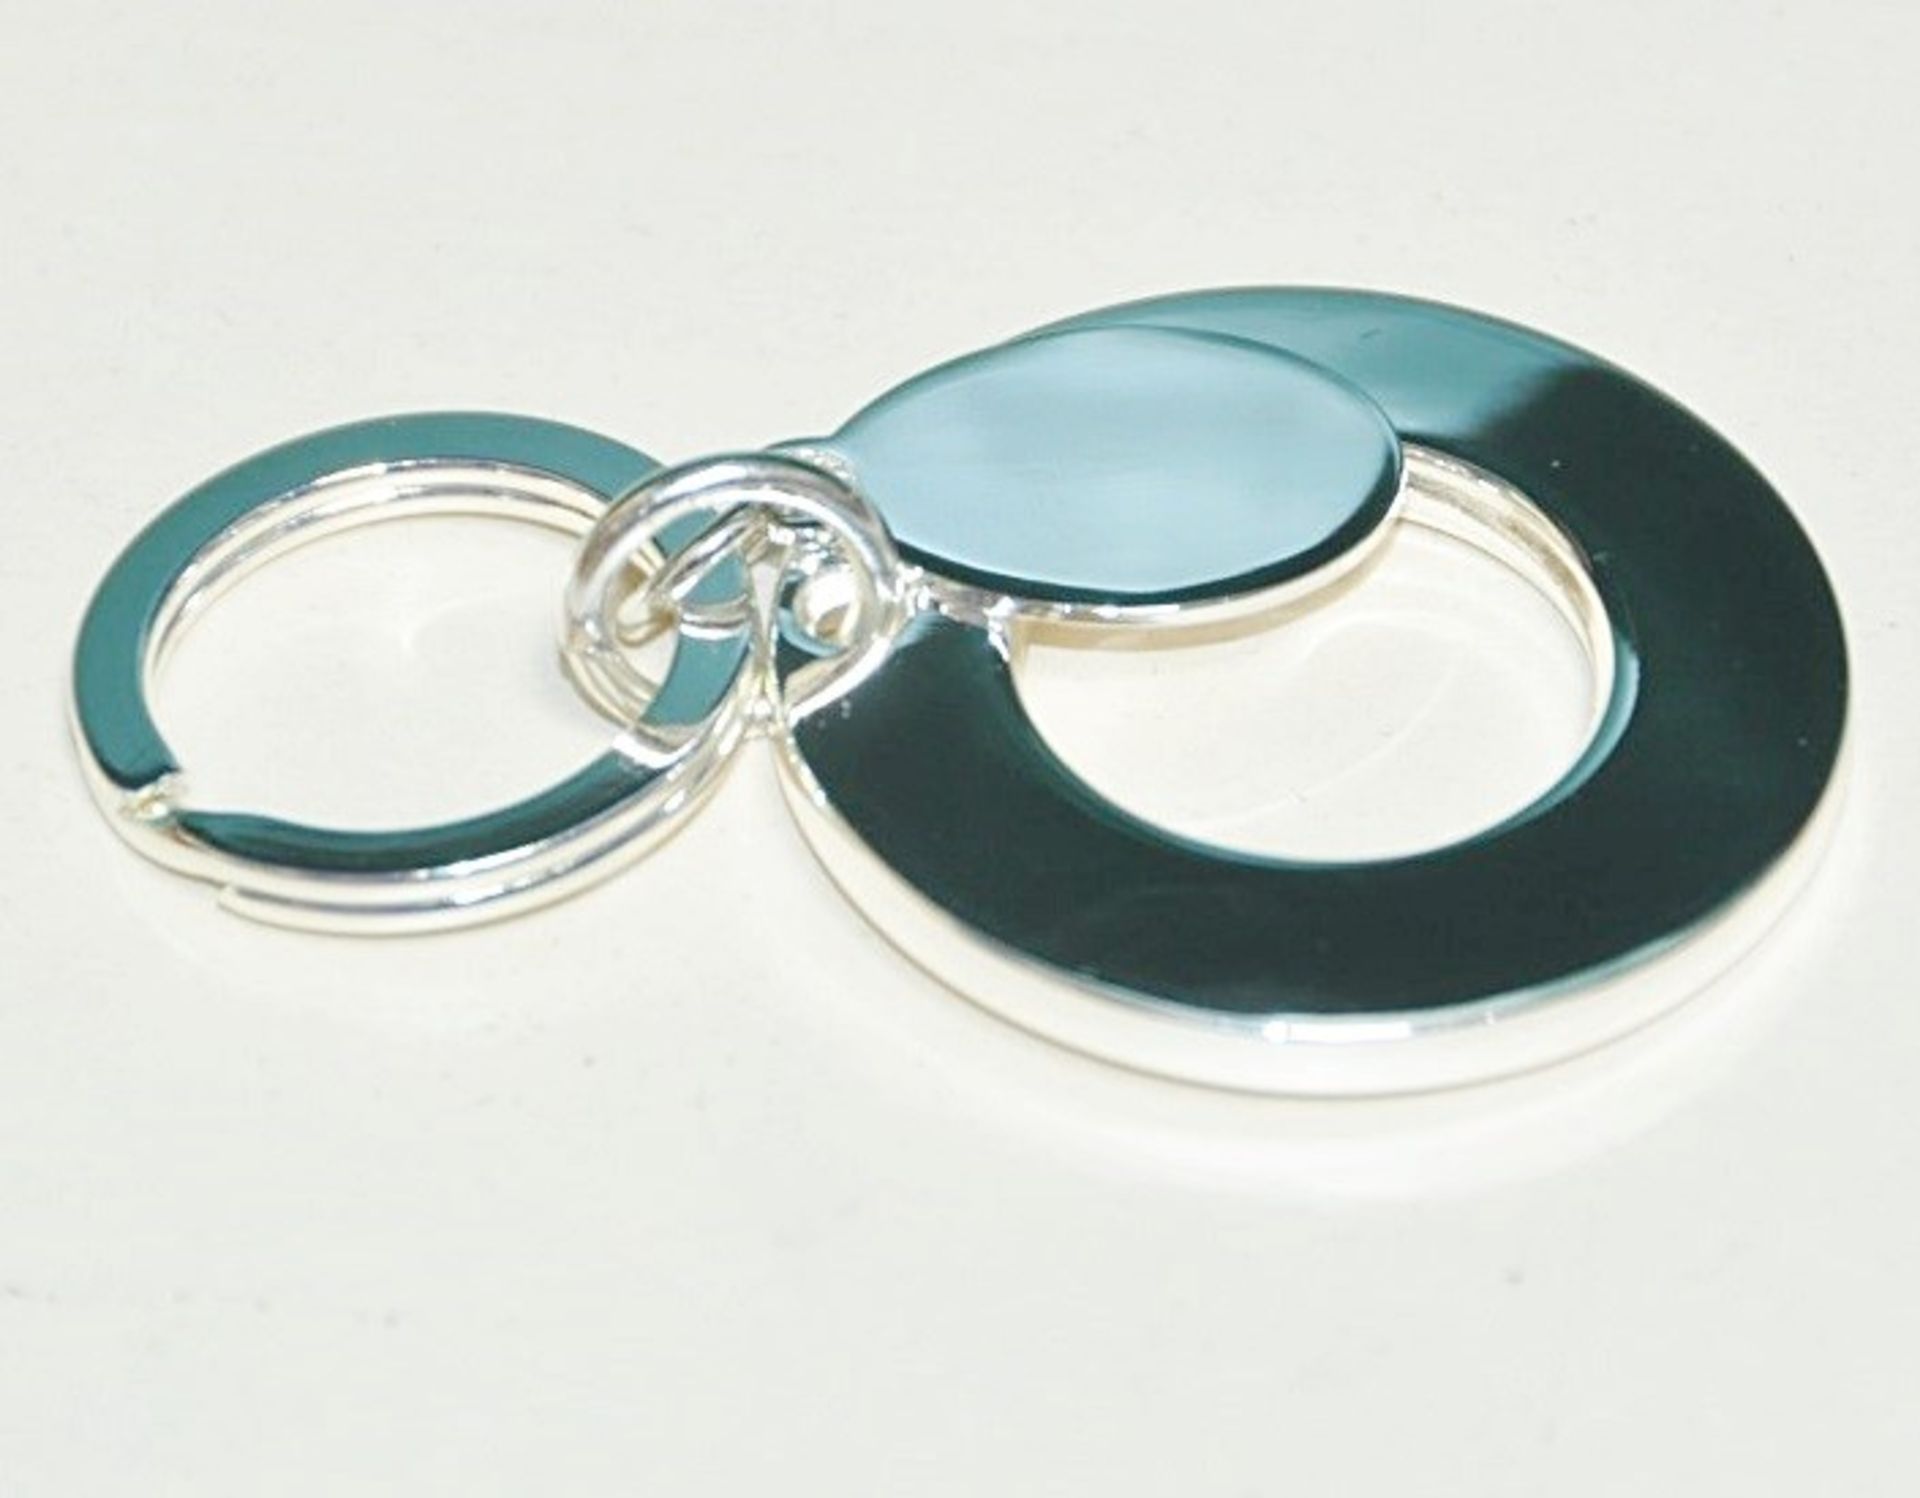 50 x Silver Plated Key Rings By ICE London - Design: SOLAR - MADE WITH "SWAROVSKI¨ ELEMENTS - Luxury